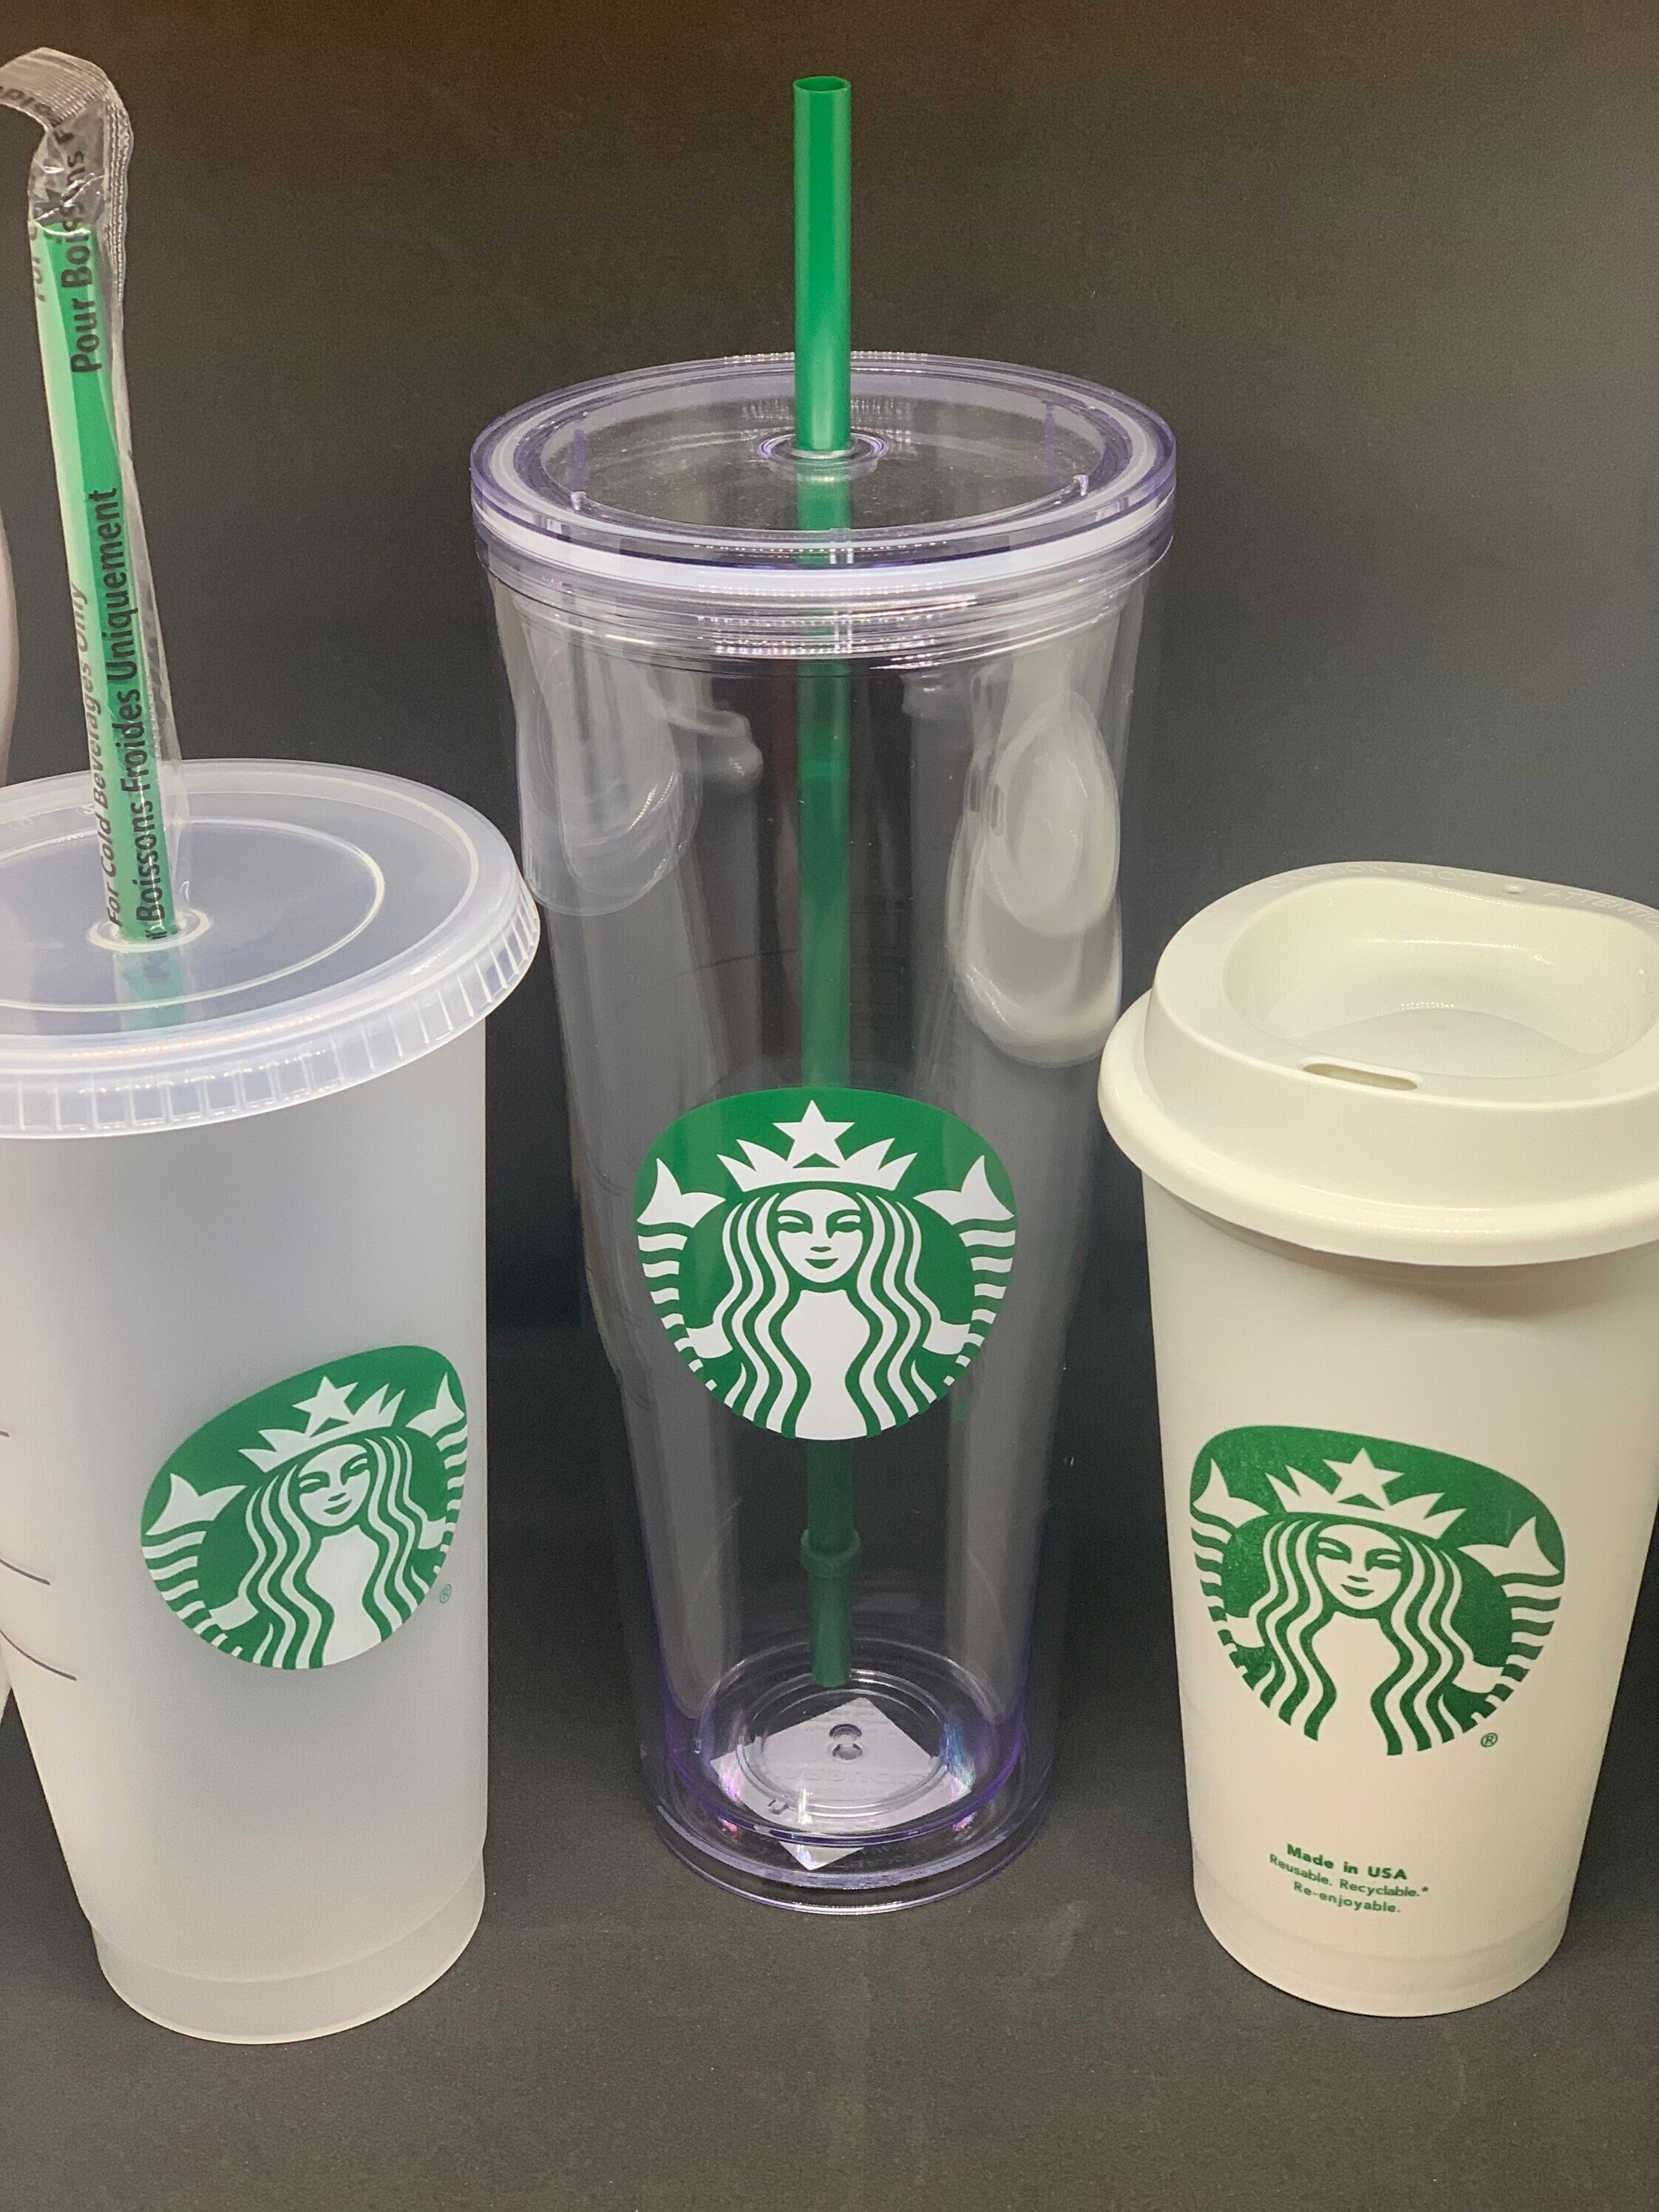 2 Starbucks Grande Clear Acrylic 16 oz Tumblers & 1 Reusable Frosted 24 oz.